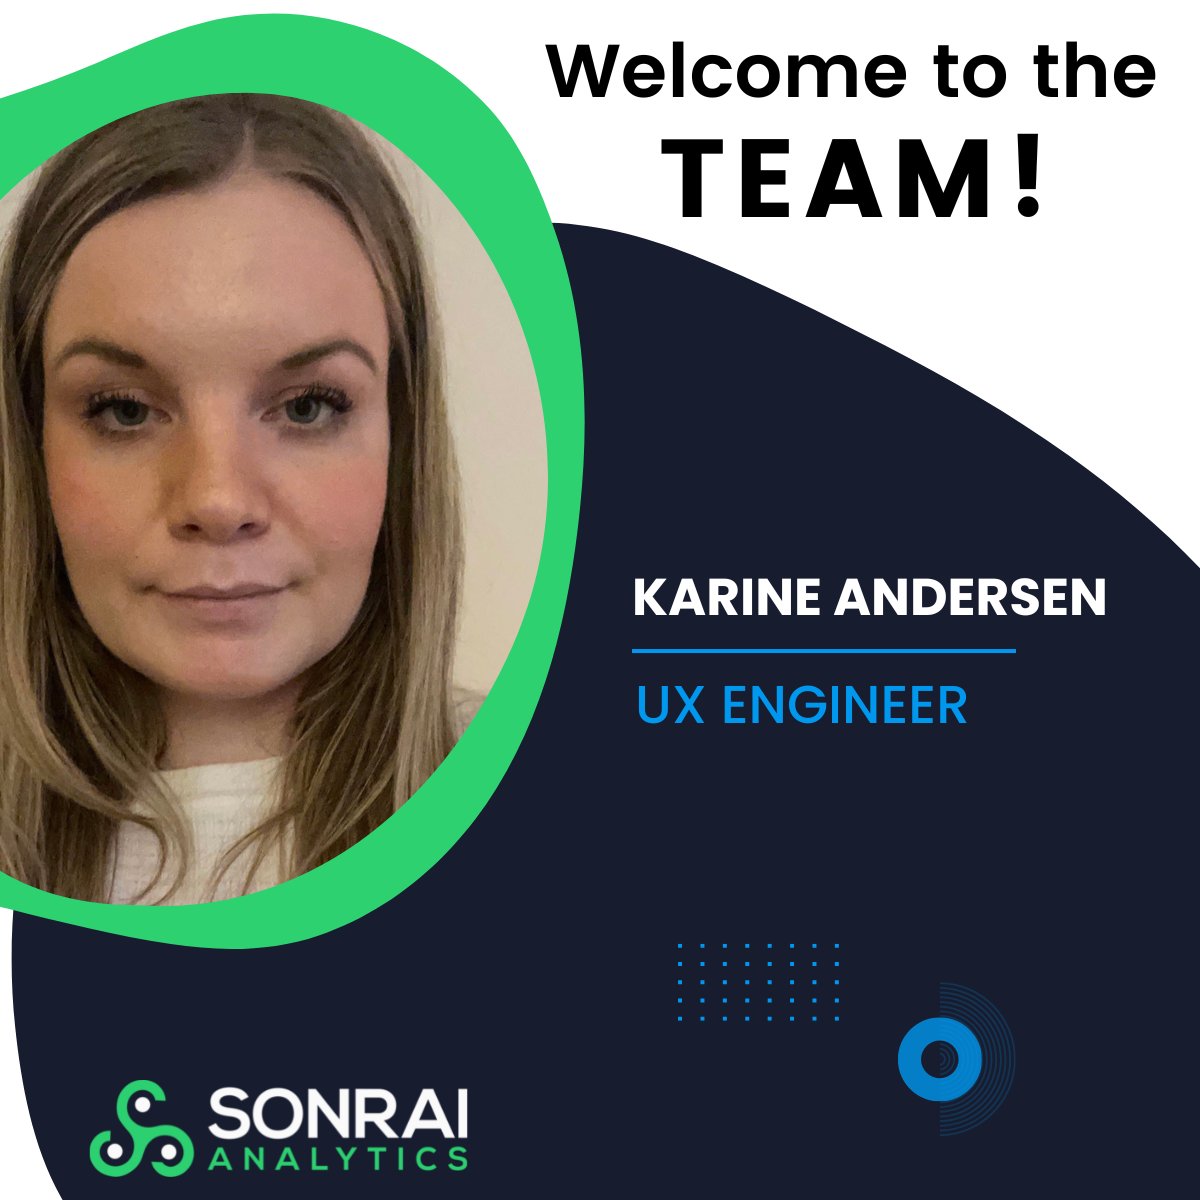 We're thrilled to welcome @KarineAndersen to the Sonrai team 🎉 Karine joins Sonrai as a UX Engineer and will be responsible for optimising systems to improve usability and create a seamless user experience. #welcome #UXEngineer #team #growing